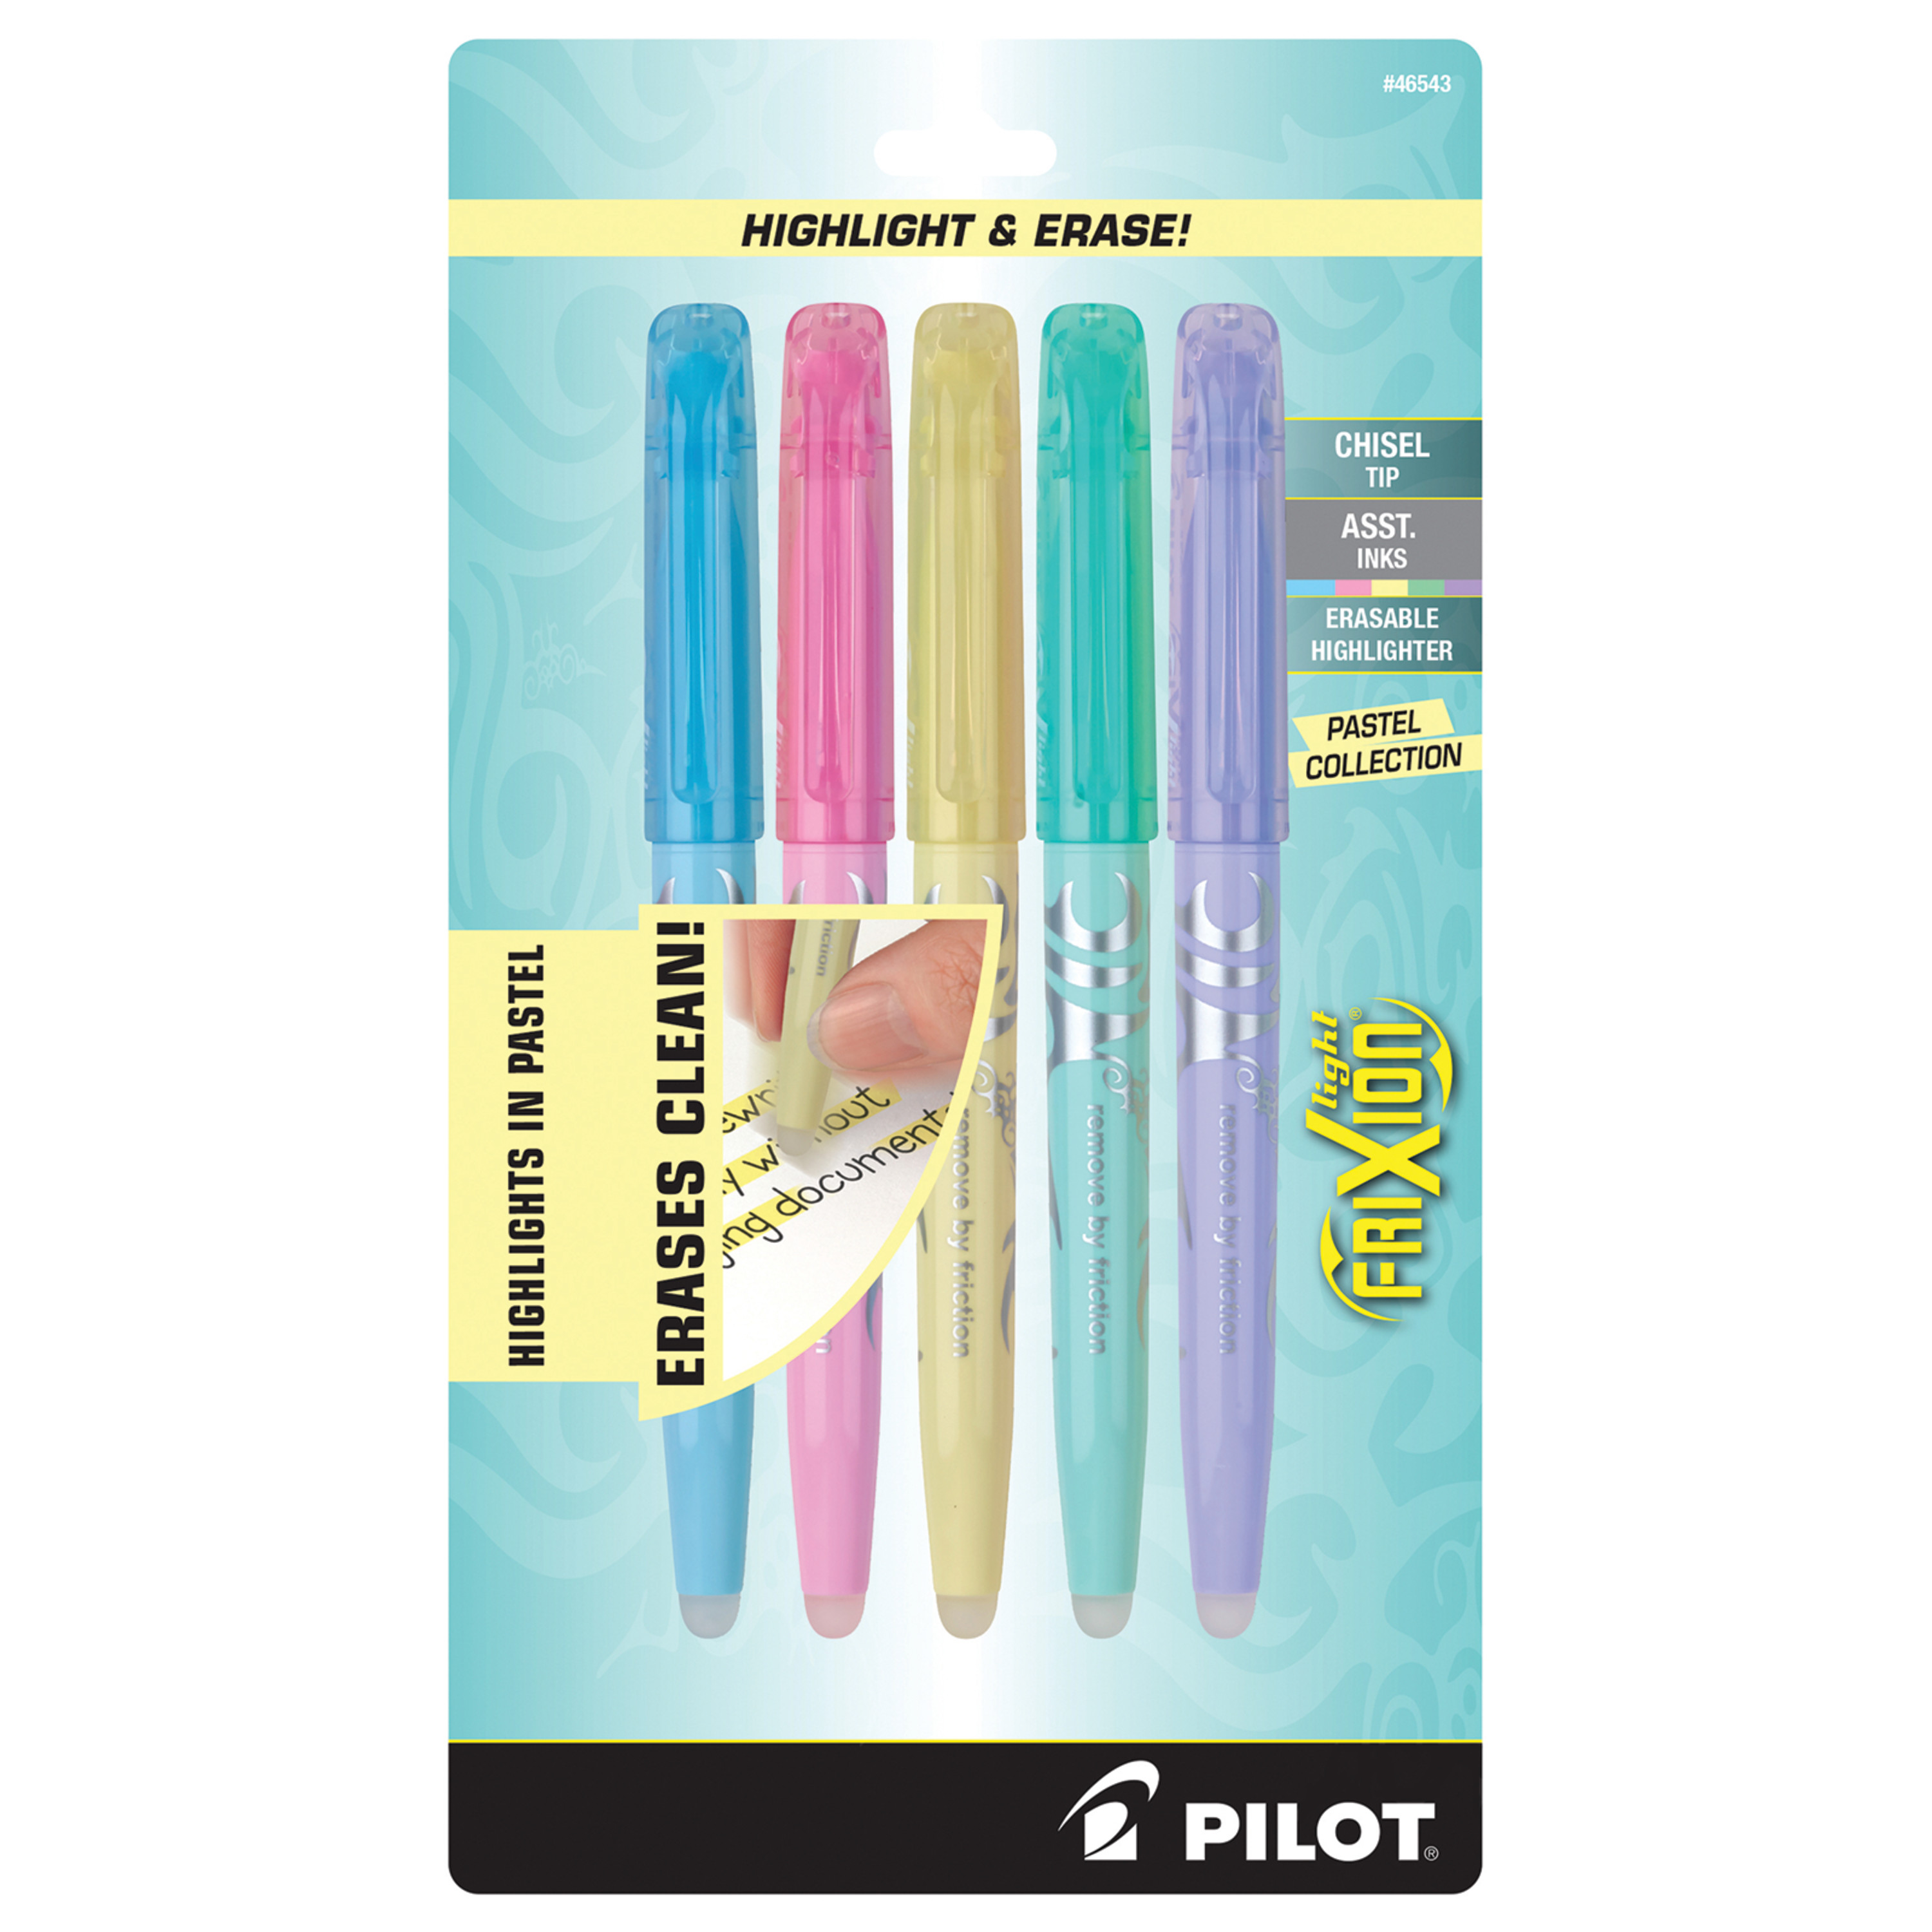 Pilot FriXion Light Erasable Highlighters, 5-Colors - image 1 of 3